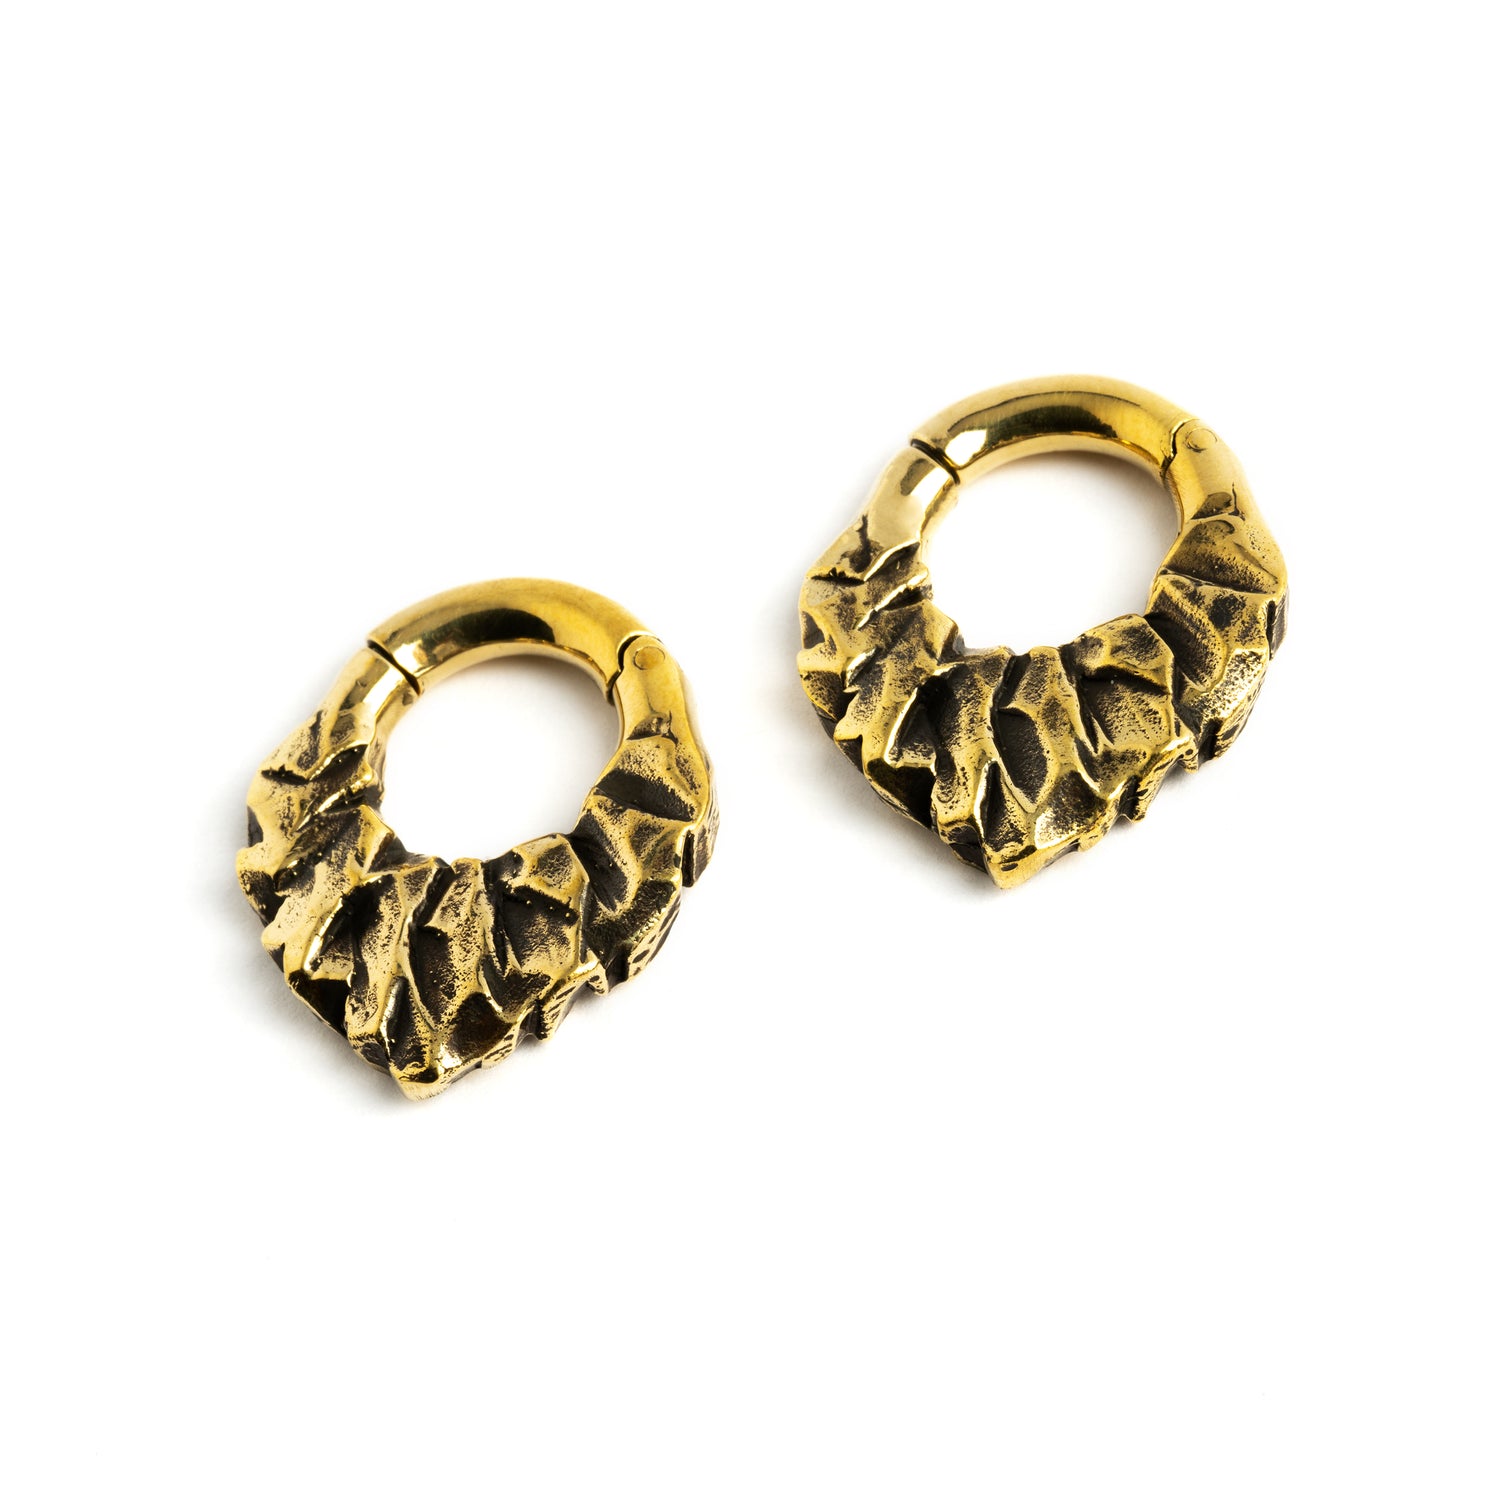 pair of gold brass teardrop shaped ear hoops hangers with rocky texture left front view